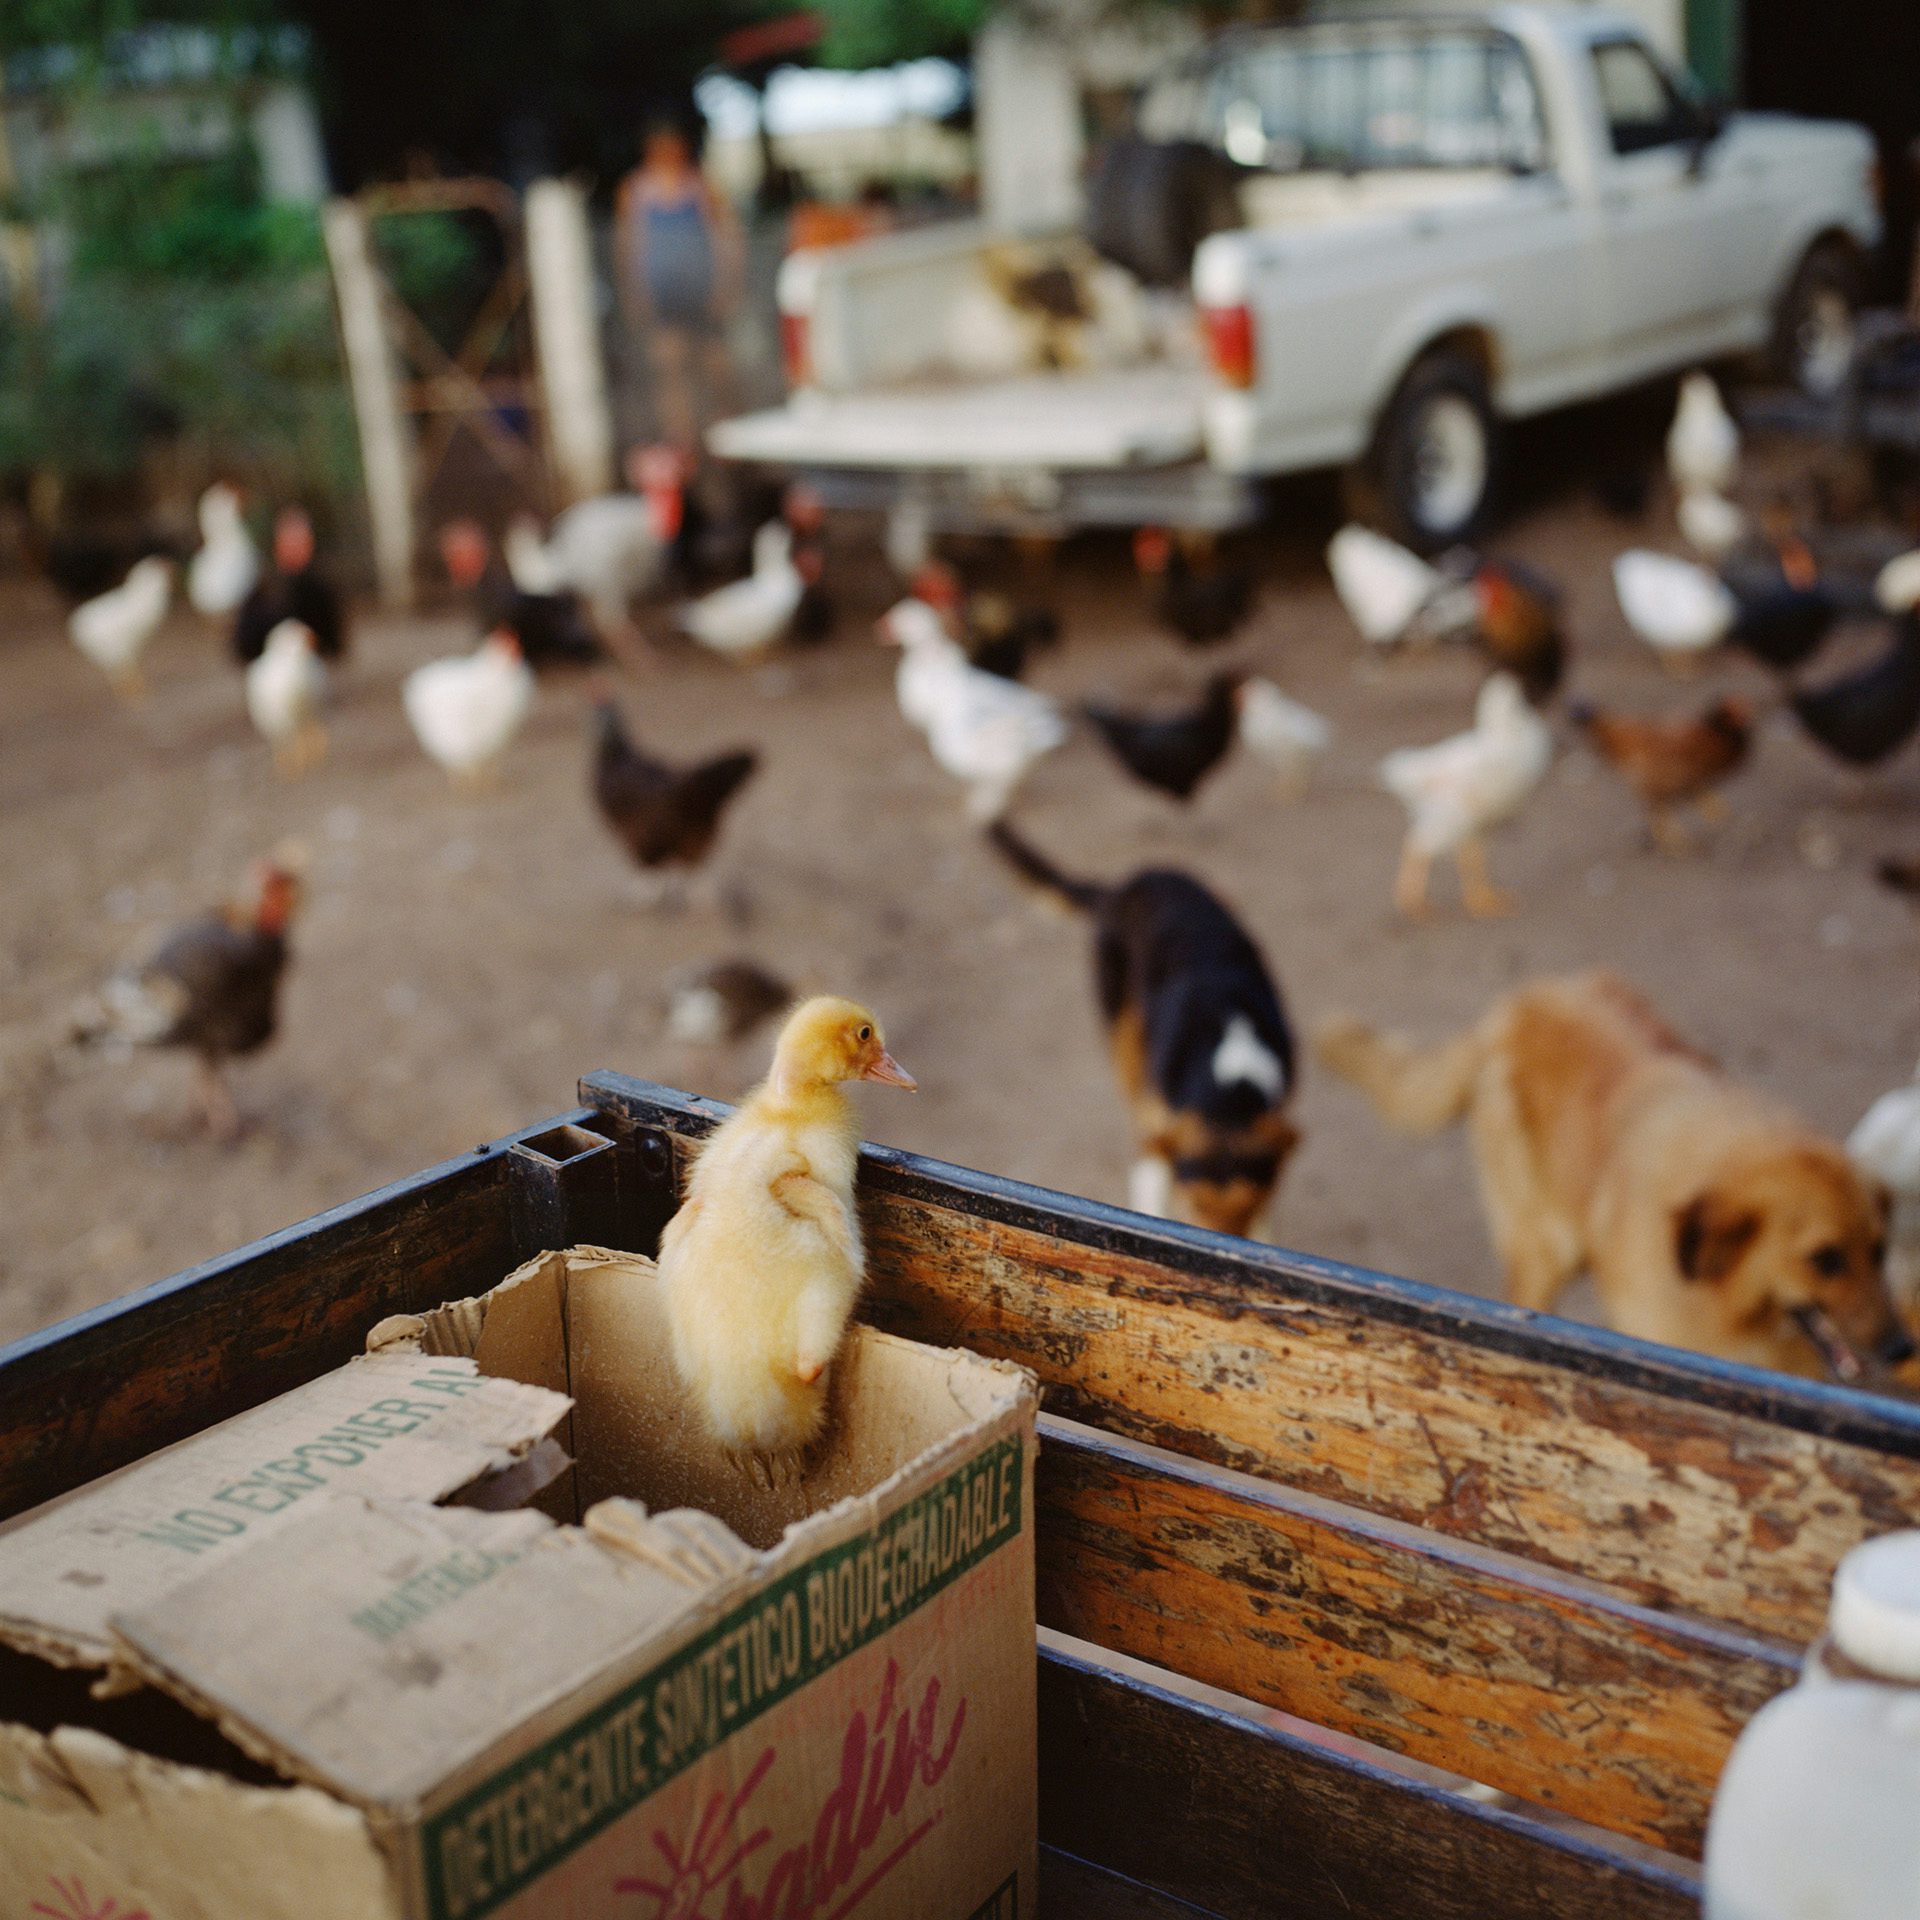 Photograph by Alessandra Sanguinetti showing a yellow duckling in a cardboard box looking out over farm dogs and chickens in a yard